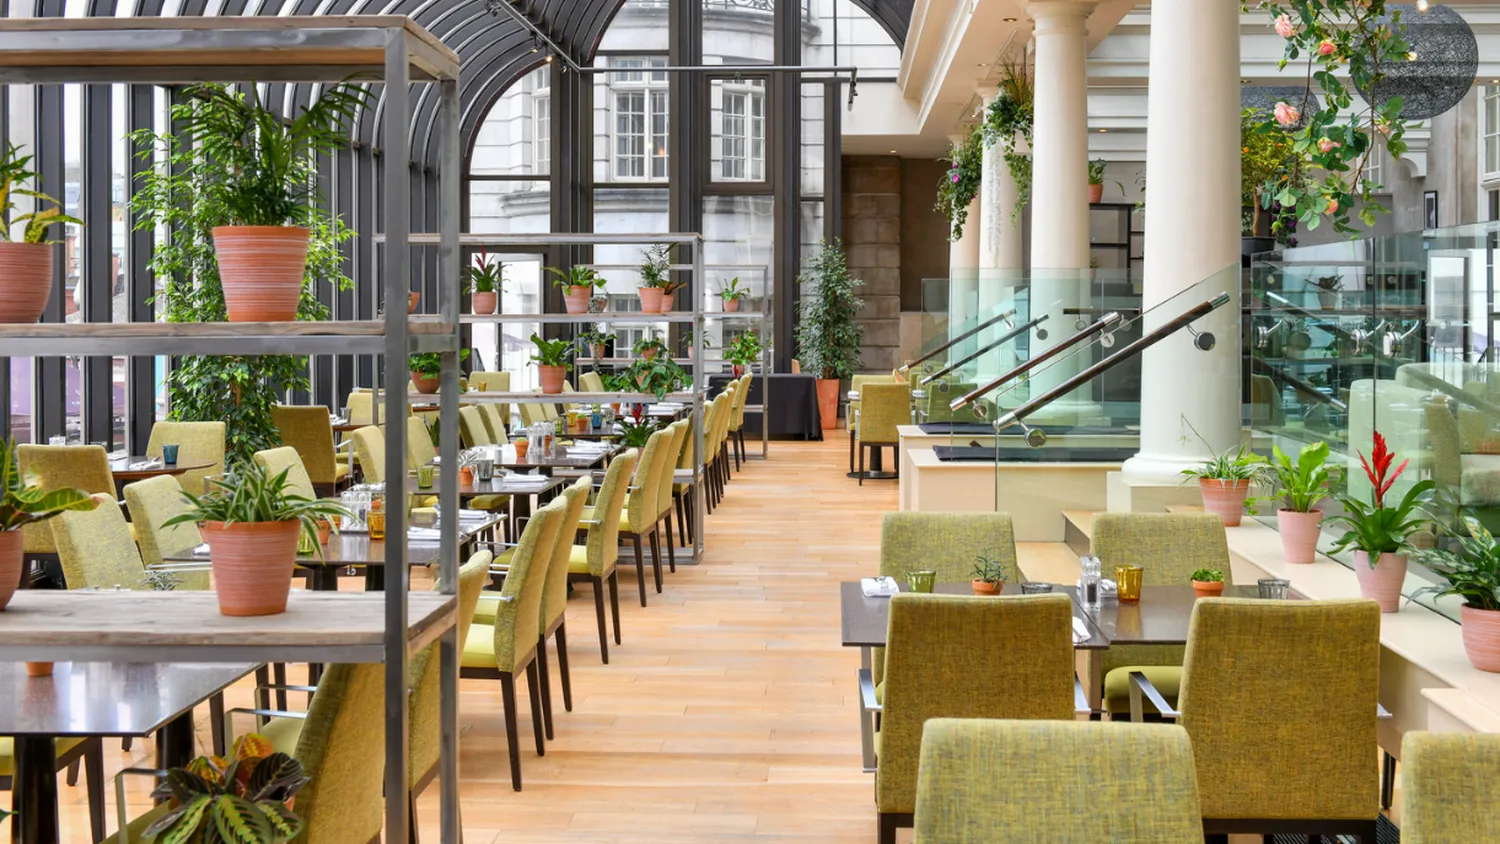 Terrace at The Dilly restaurant London